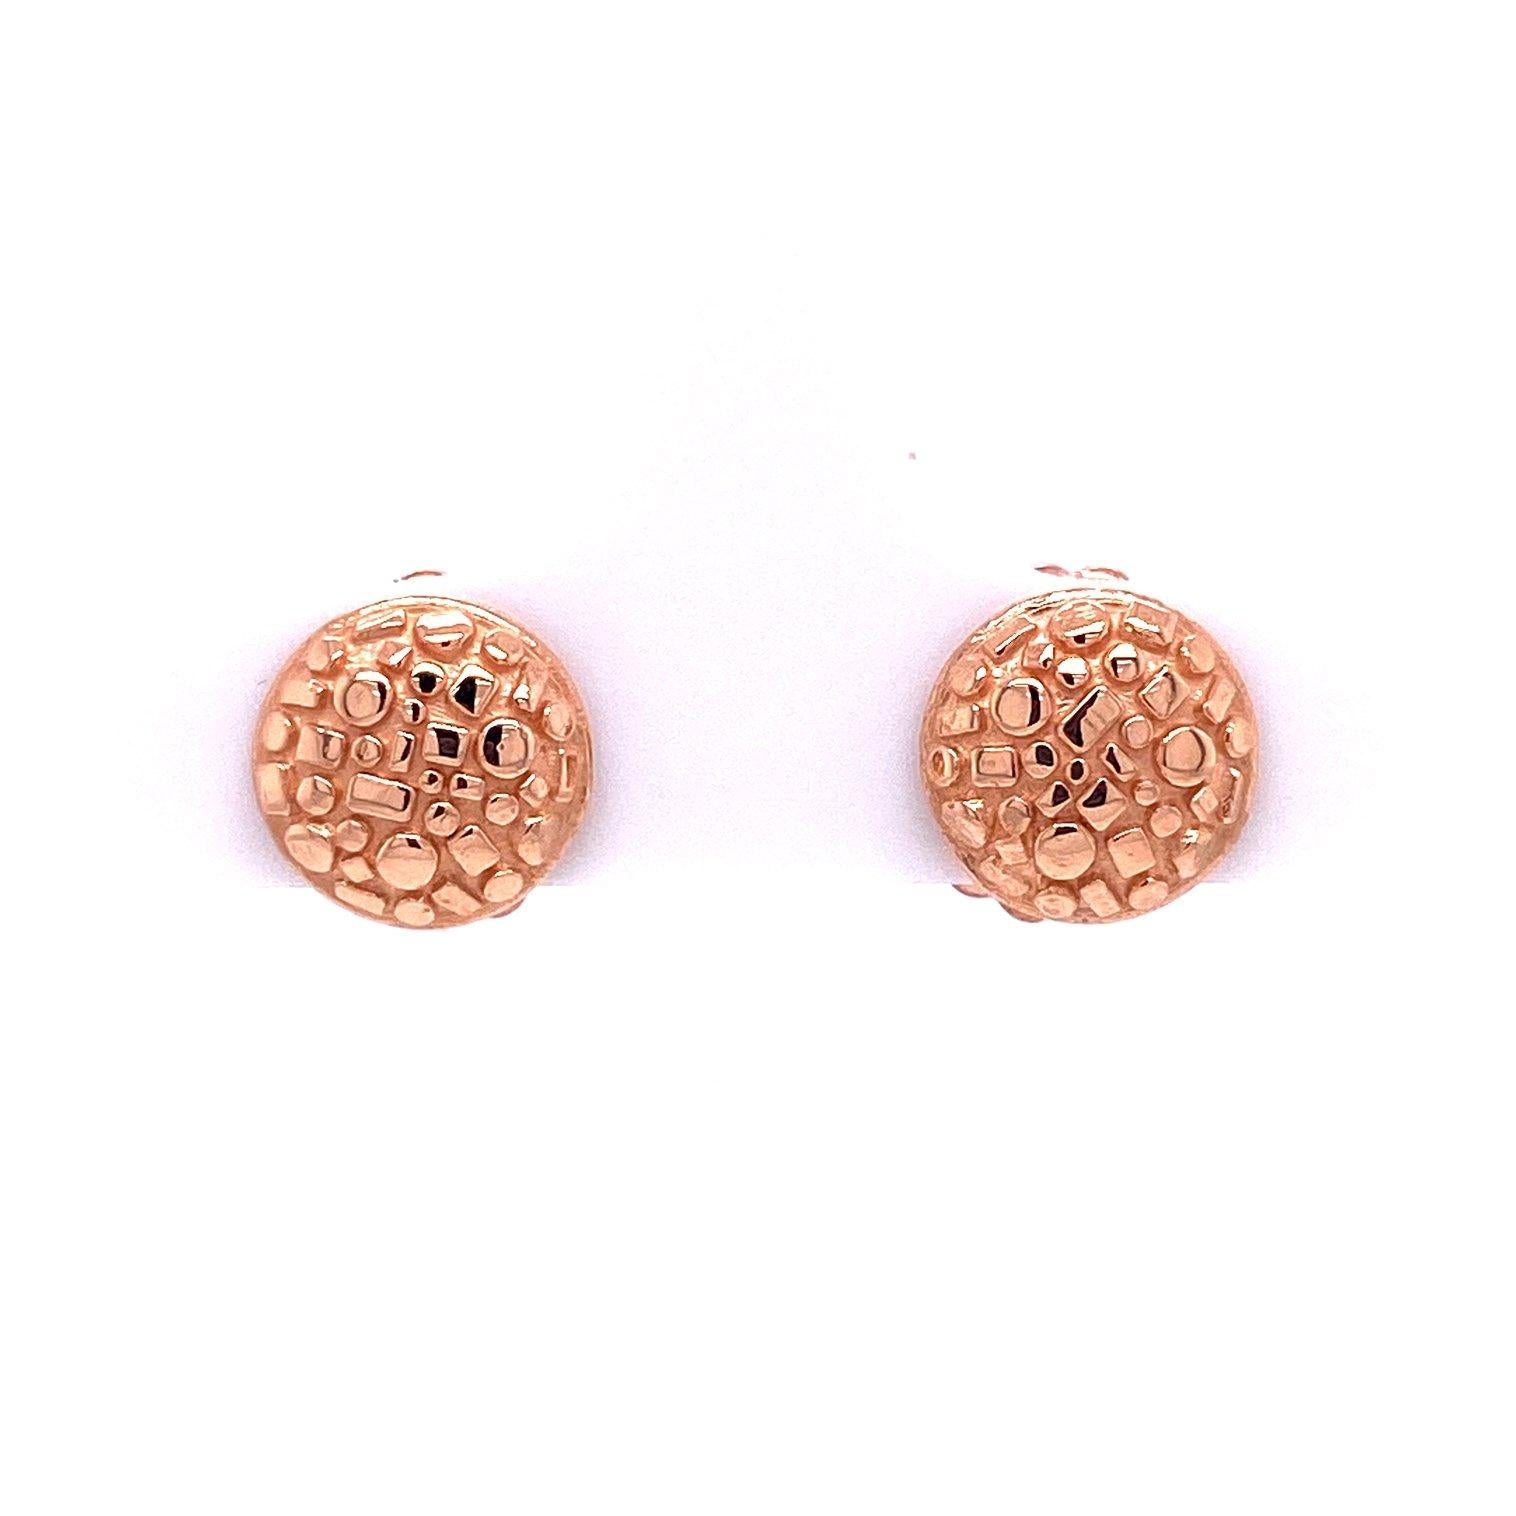 Contemporary 18k Rose Gold Bits and Pieces Studs with 18k Rose Gold White Druzy Wing Jackets